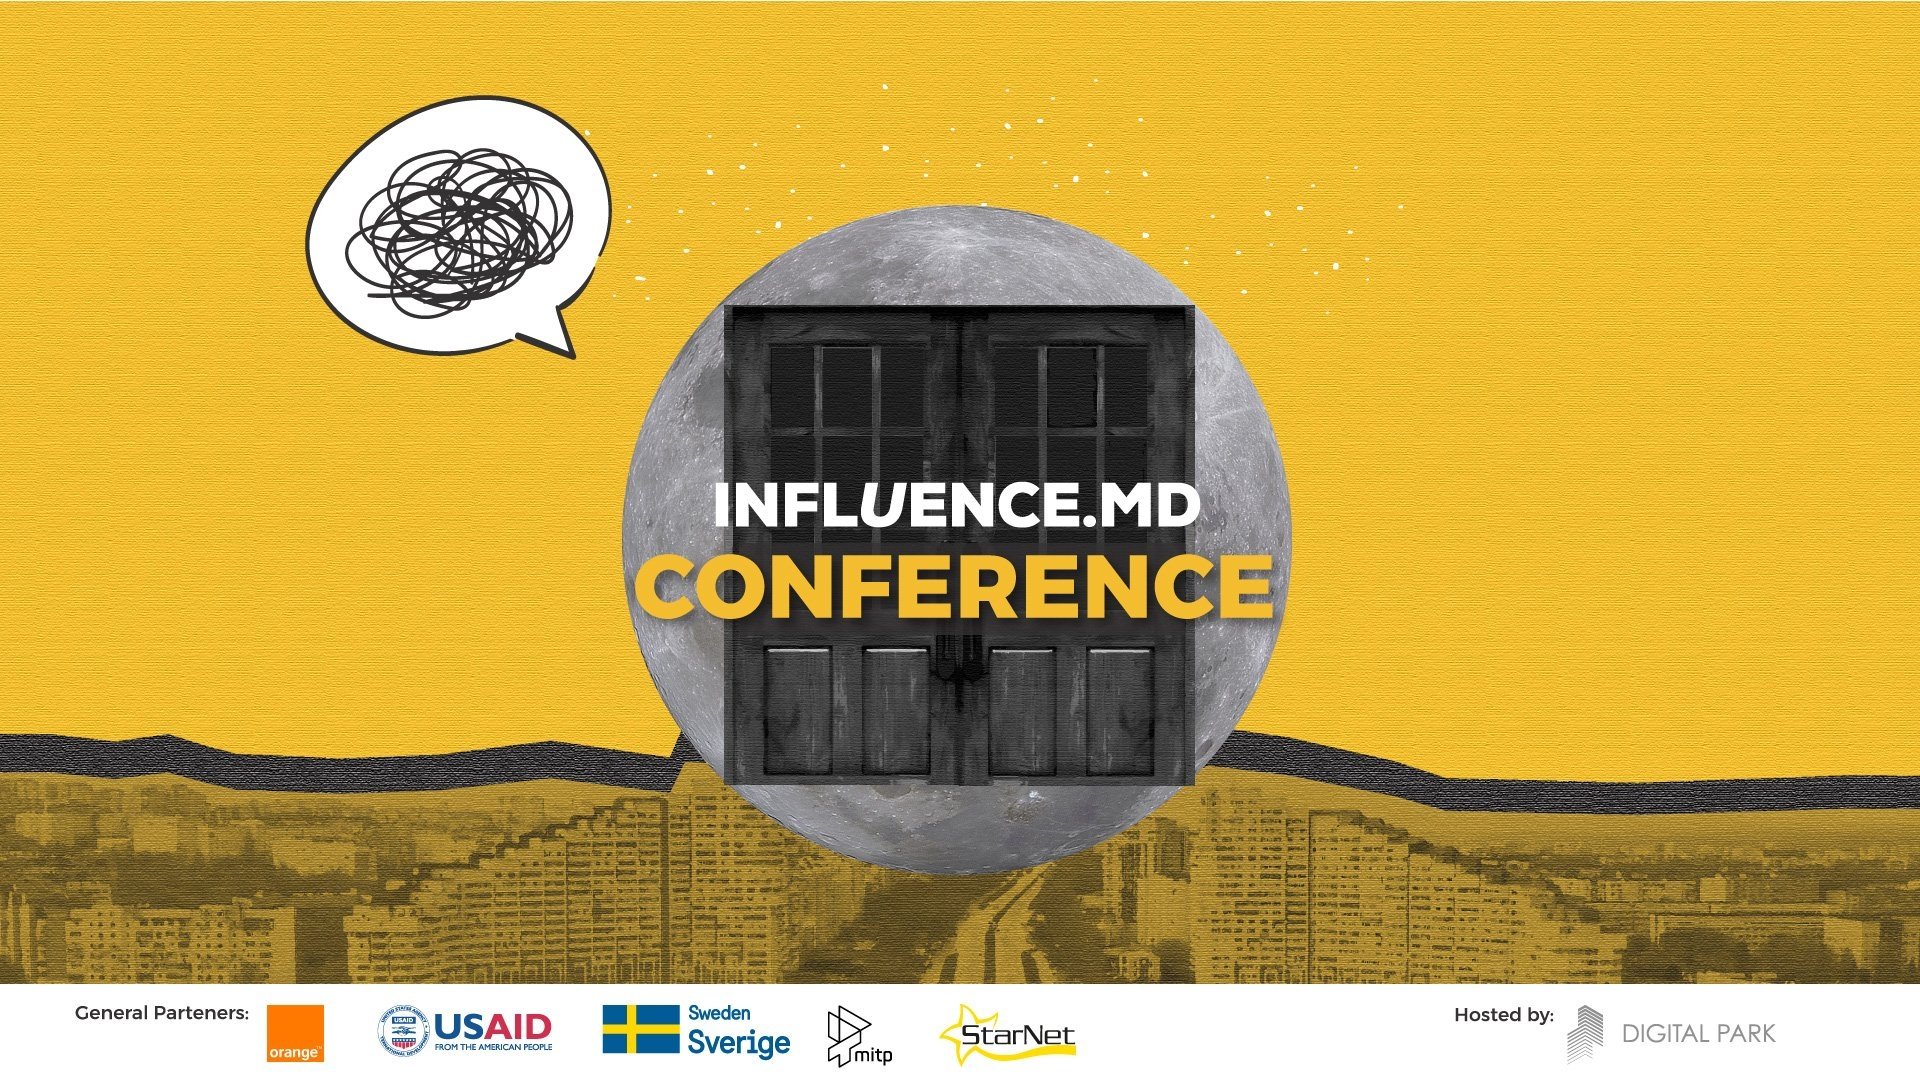 Influence.md Conference